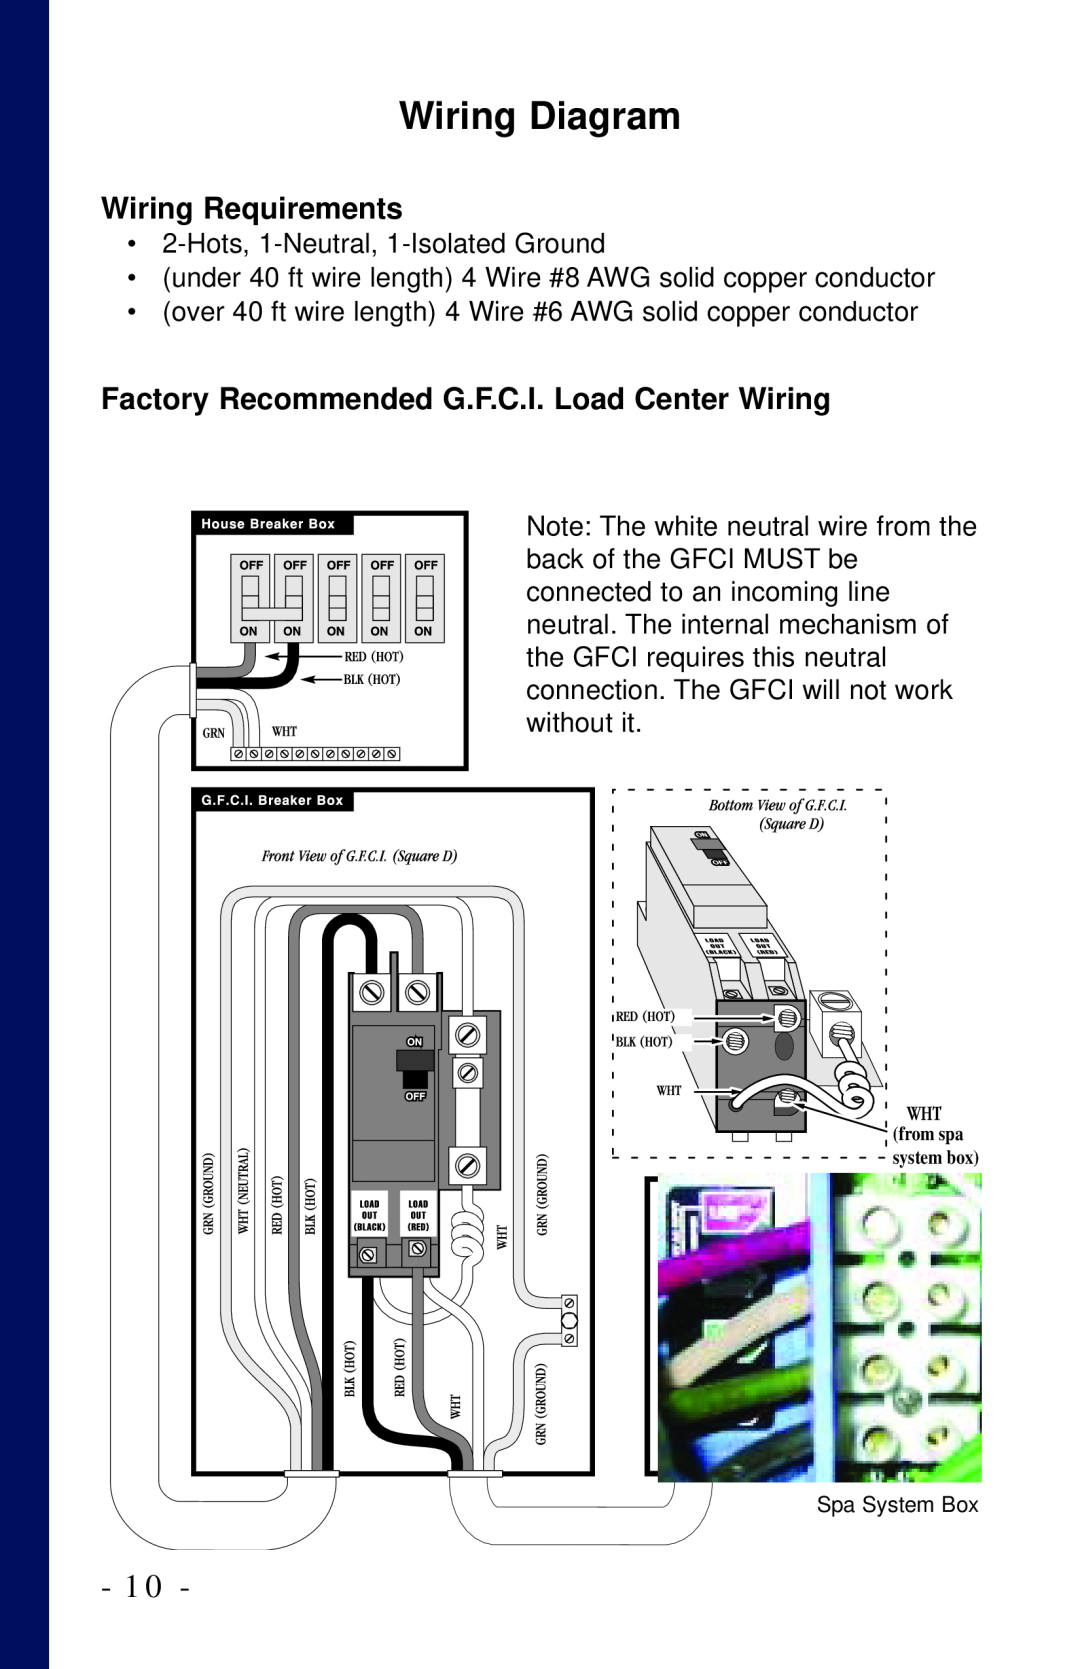 Dynasty Spas 2006 owner manual Wiring Diagram, Wiring Requirements, Factory Recommended G.F.C.I. Load Center Wiring 